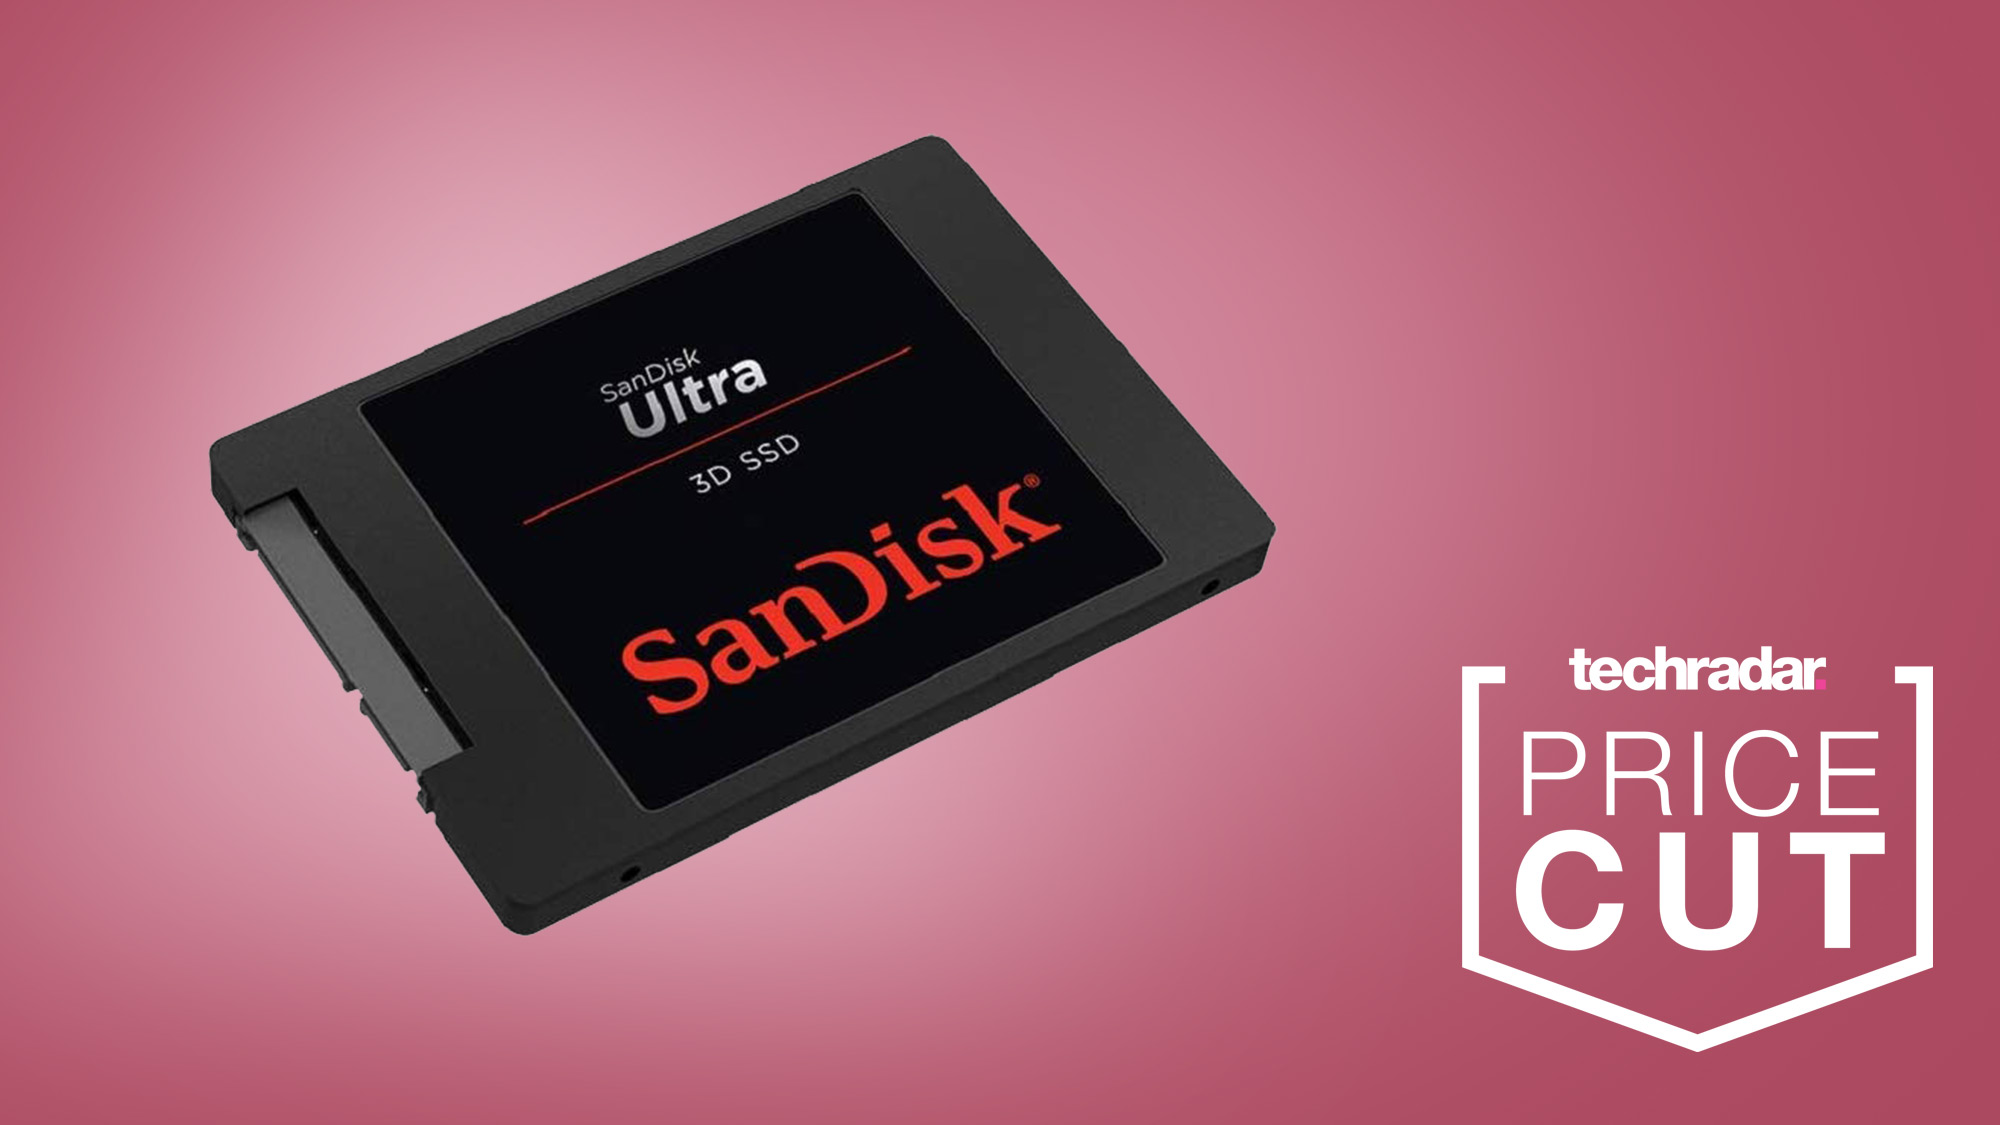 If You Need A 2tb Sandisk Ssd This Black Friday Ssd Deal Can T Be Images, Photos, Reviews